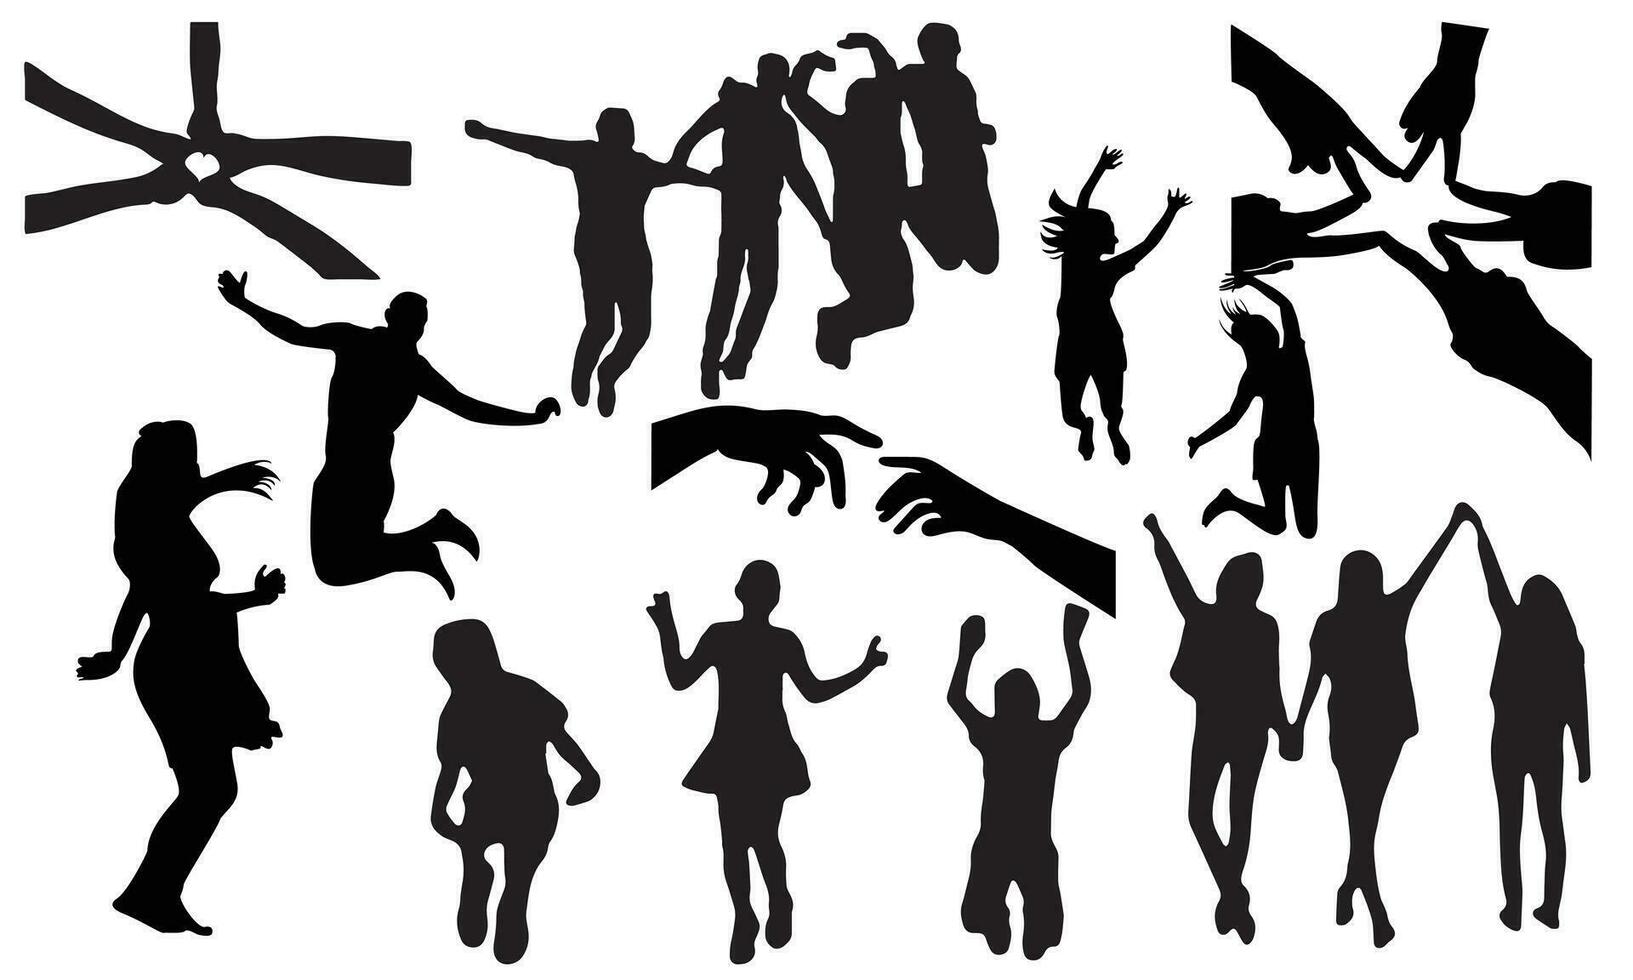 friend silhouette, dancing people silhouette, party people silhouette vector